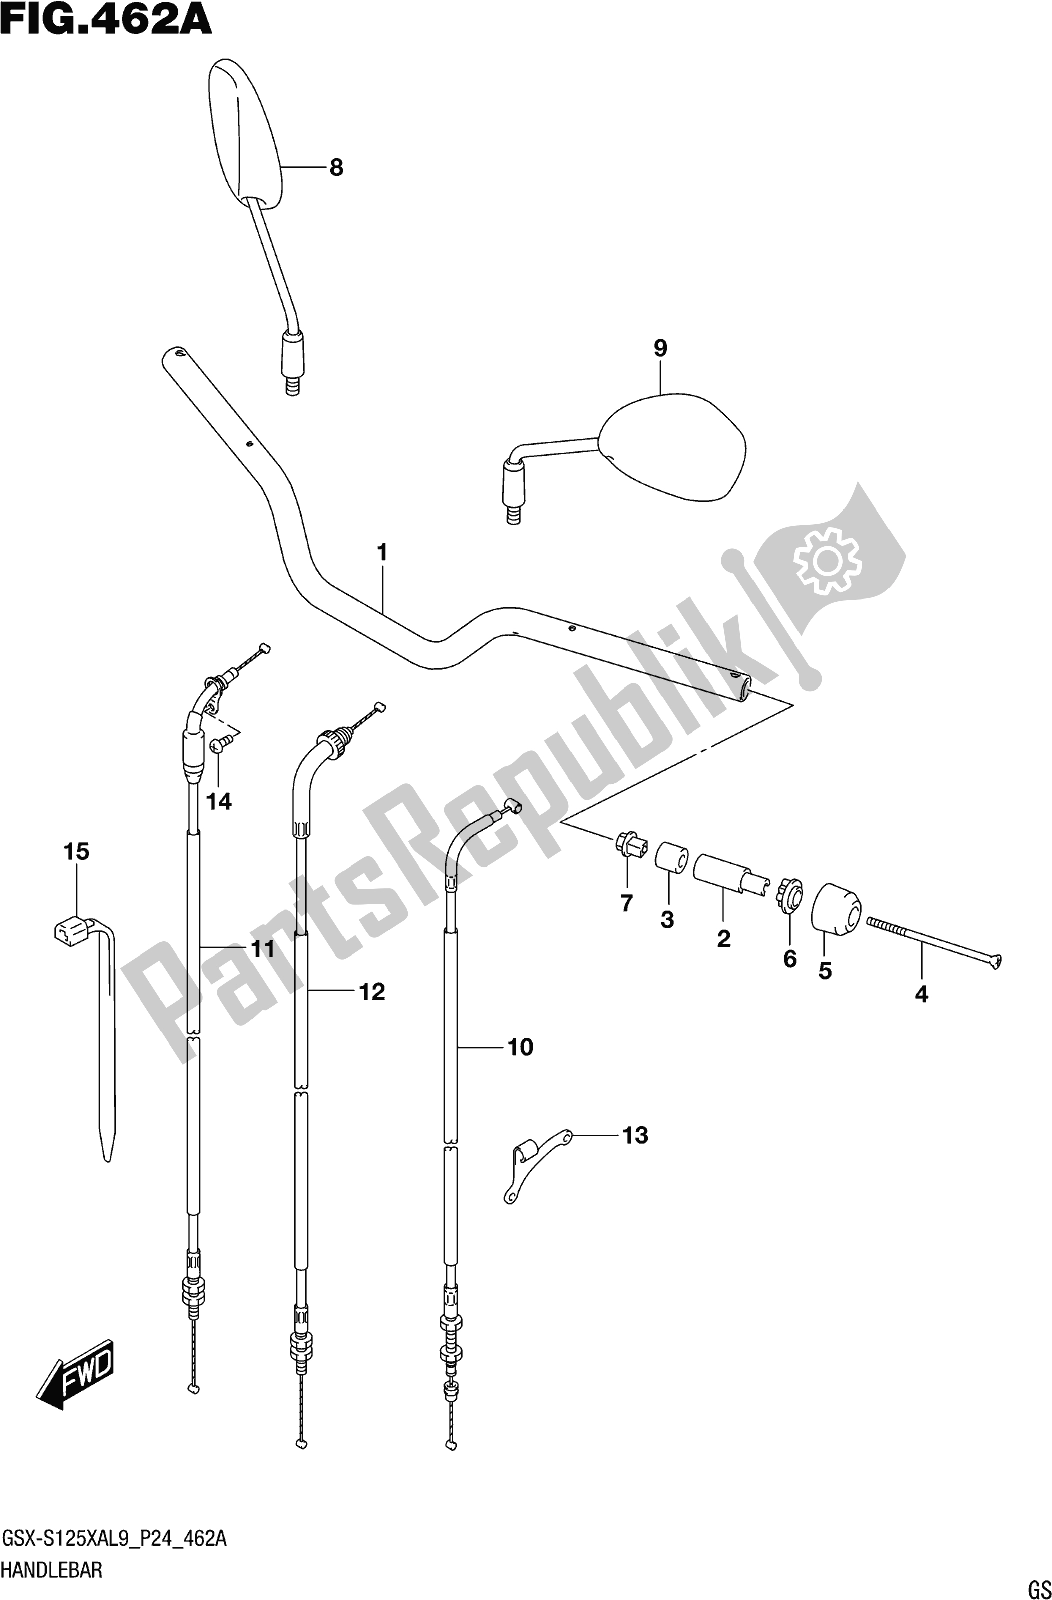 All parts for the Fig. 462a Handlebar of the Suzuki Gsx-s 125 XA 2019